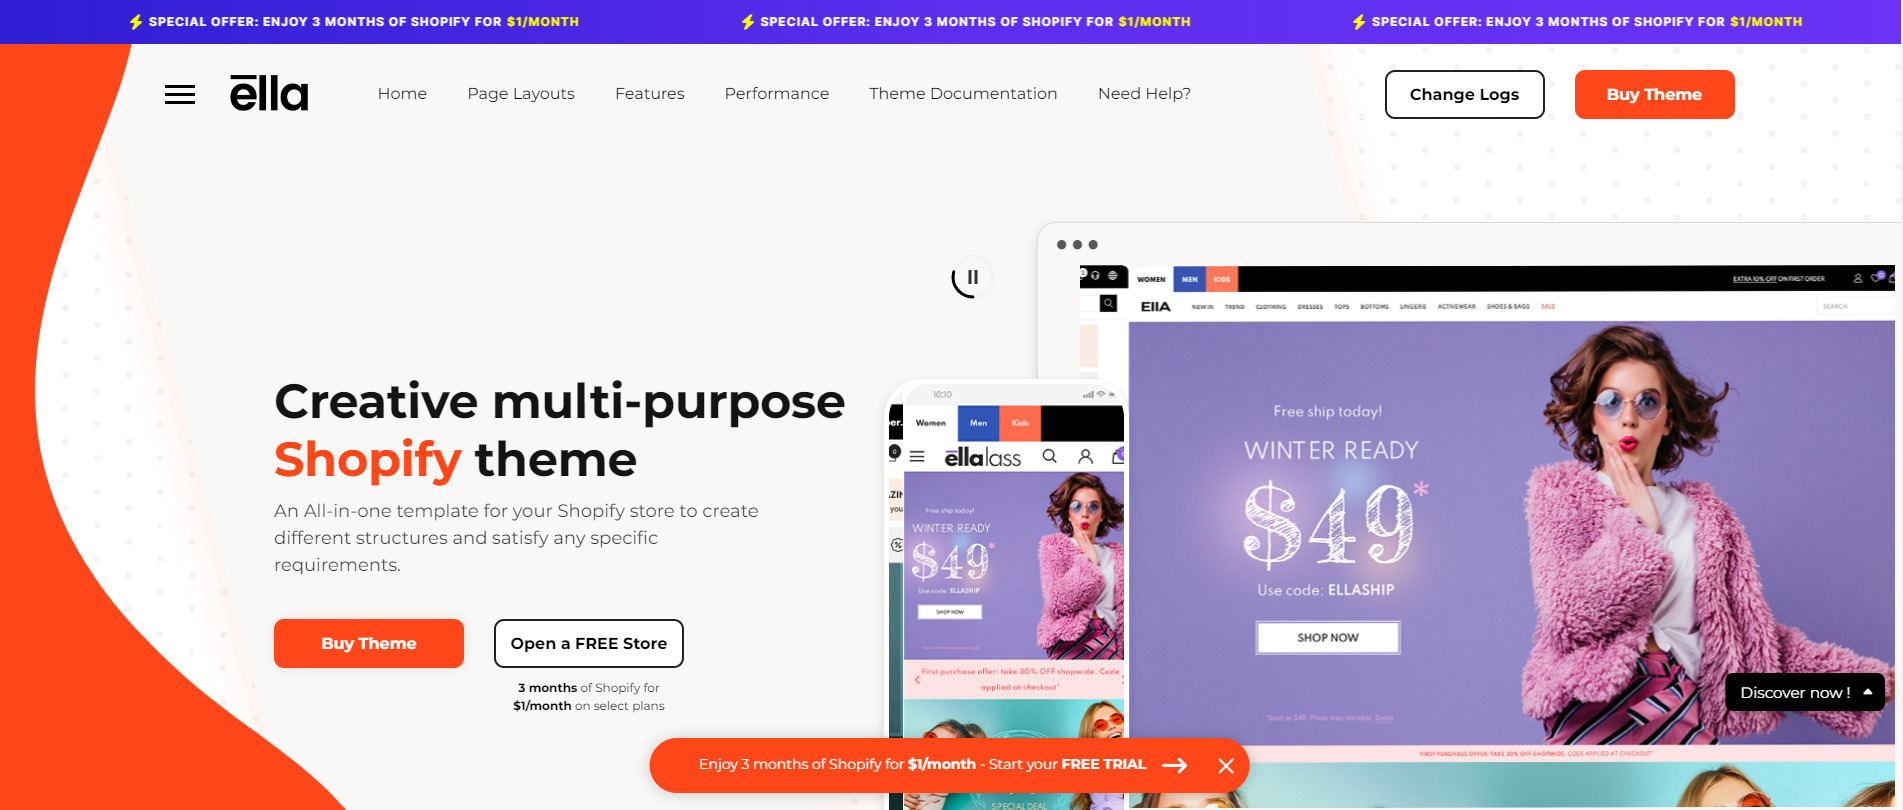 Ella best shopify theme for one product store